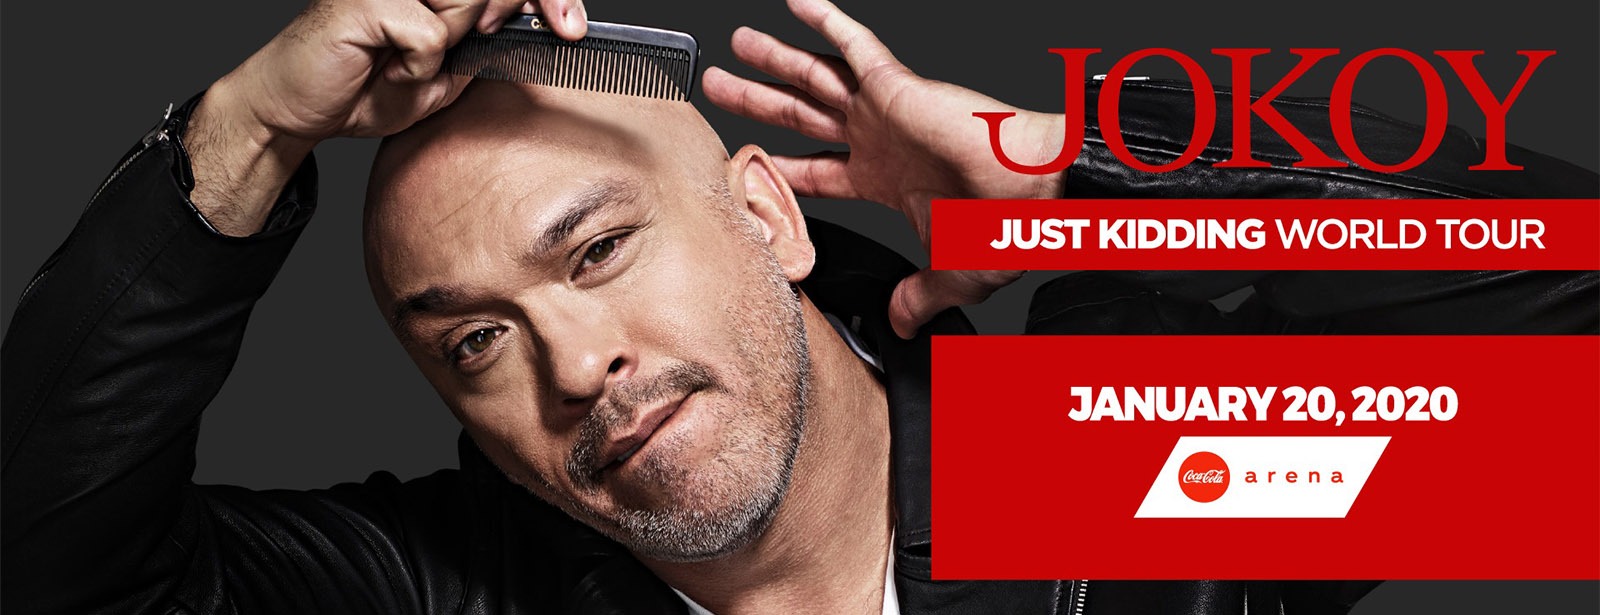 Jo Koy at the Coca-Cola Arena - Coming Soon in UAE